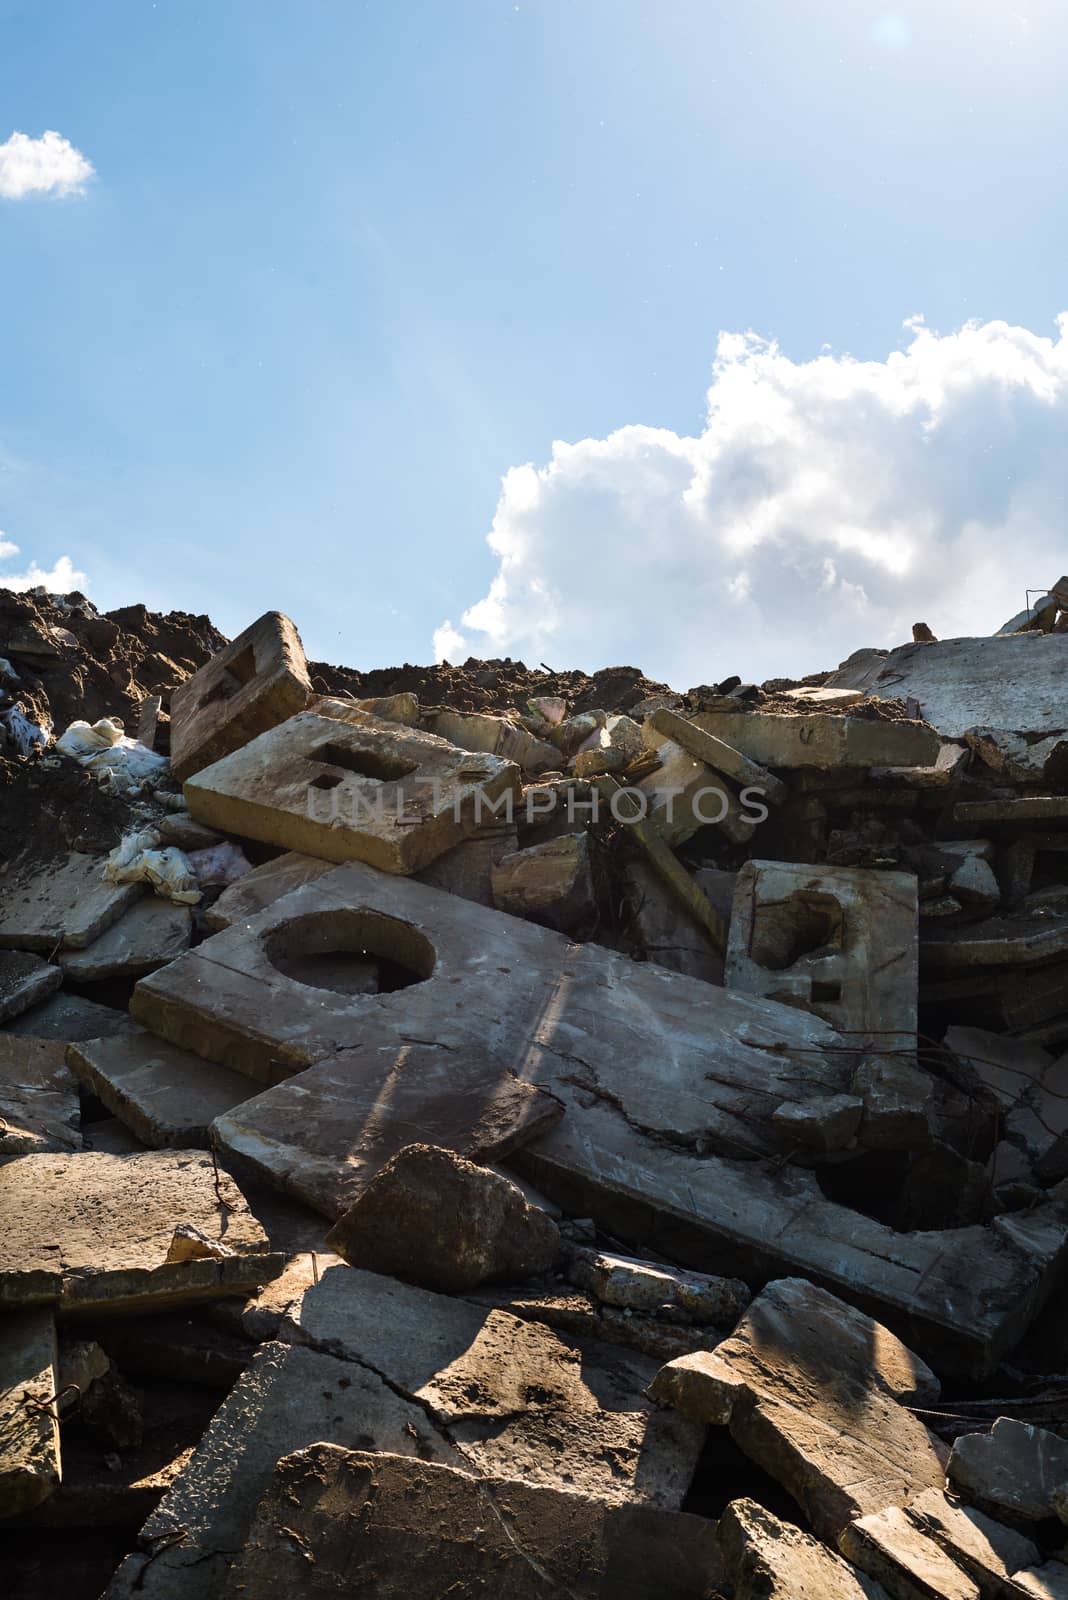 Heap of the damaged concrete blocks by rootstocks